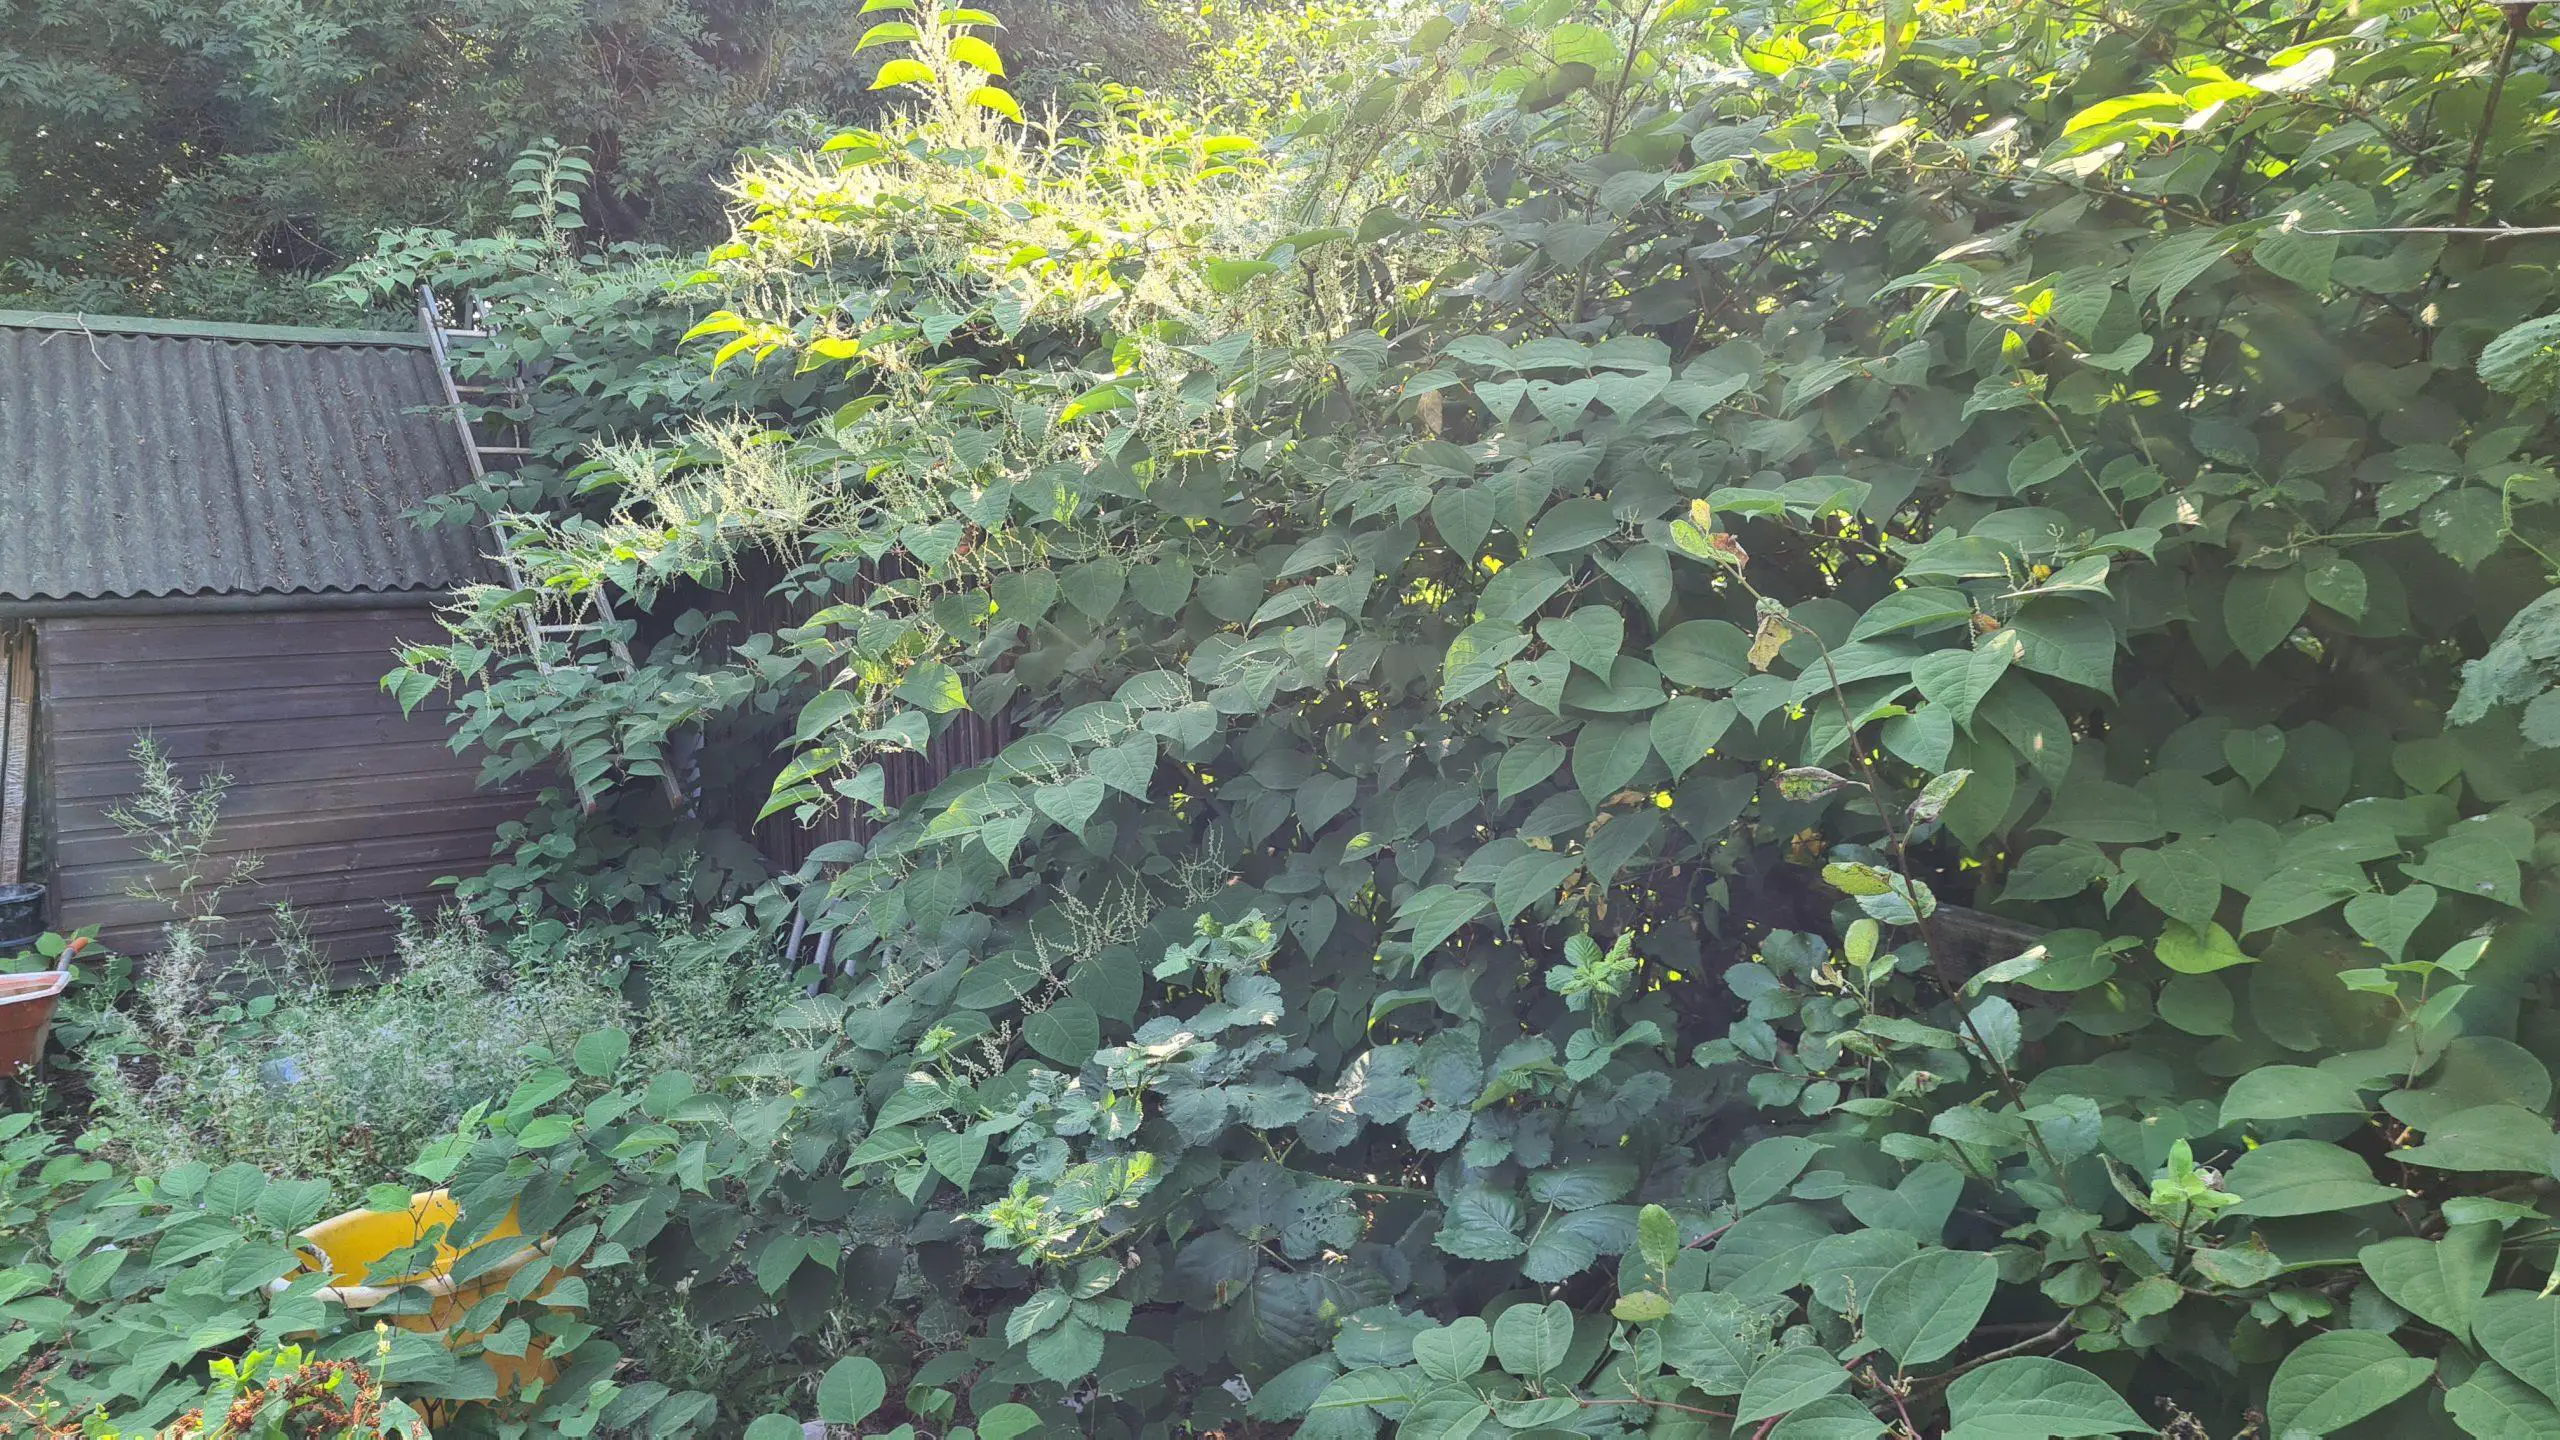 Establishing the area that this invasive plant covers will allow you or a contractor an idea of how much and how long it will take to clear